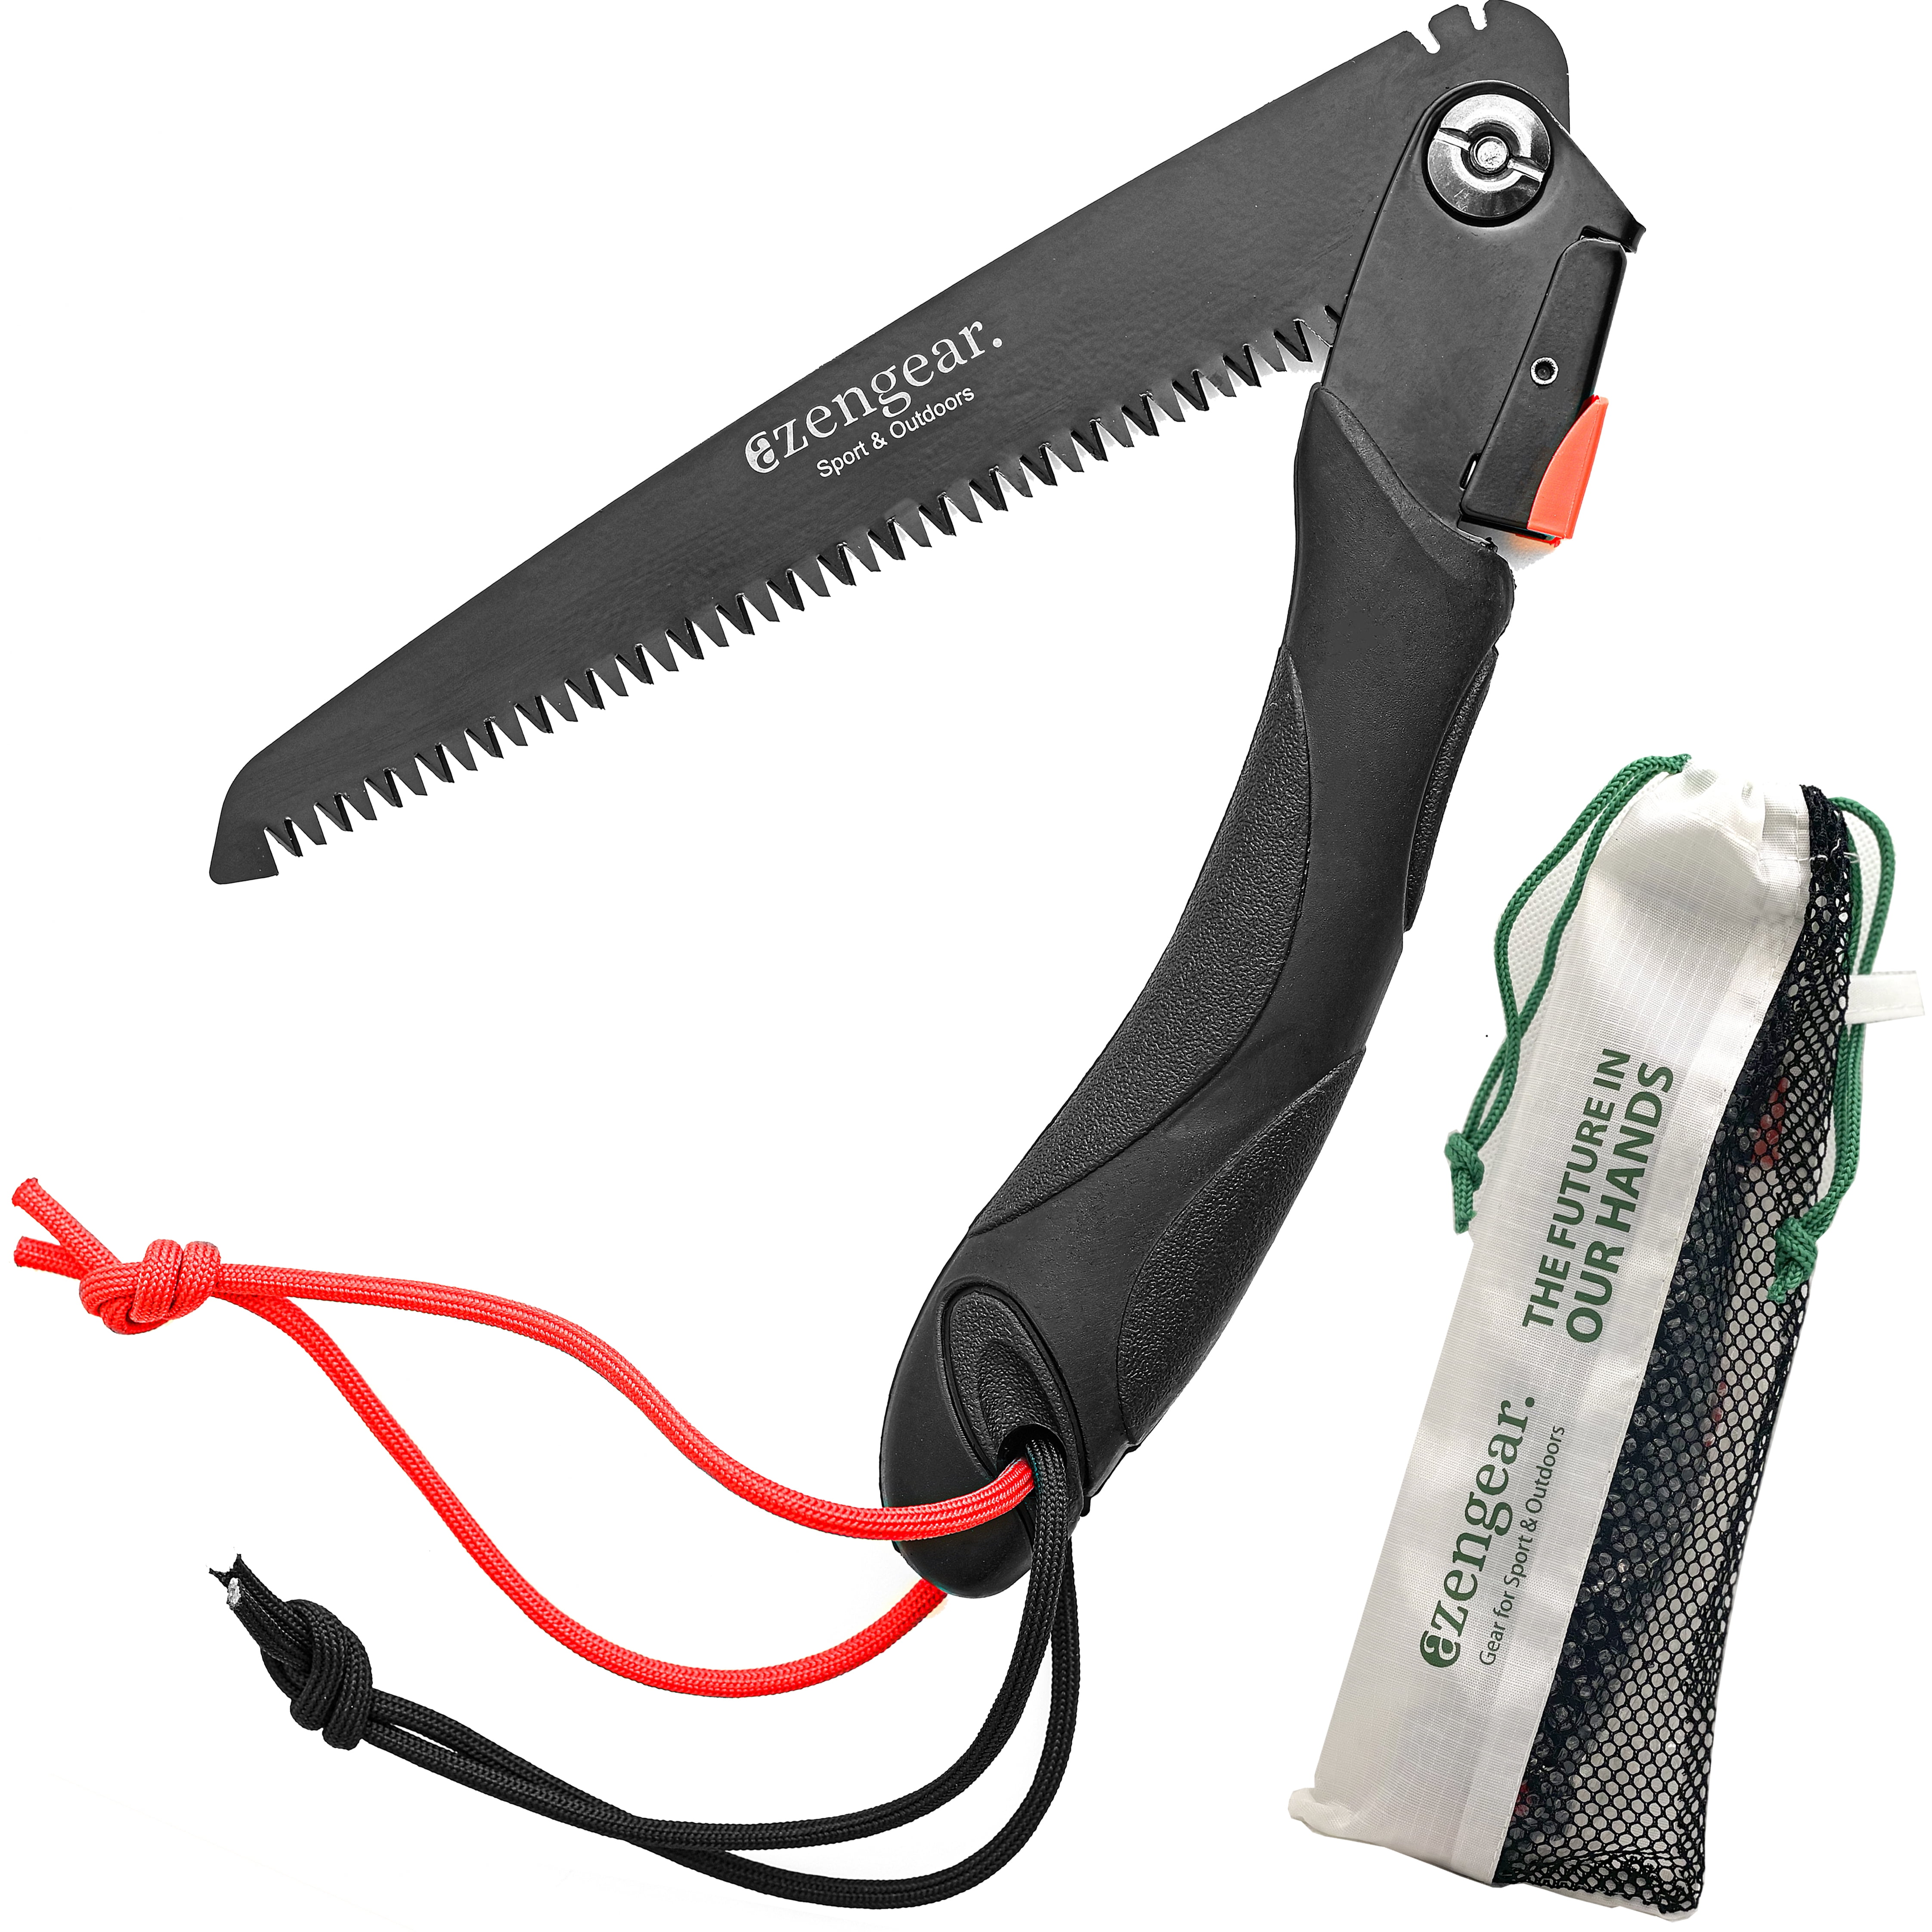 Mini Folding Camping and Pruning Saw Great for Survival Kits Gardening Tools